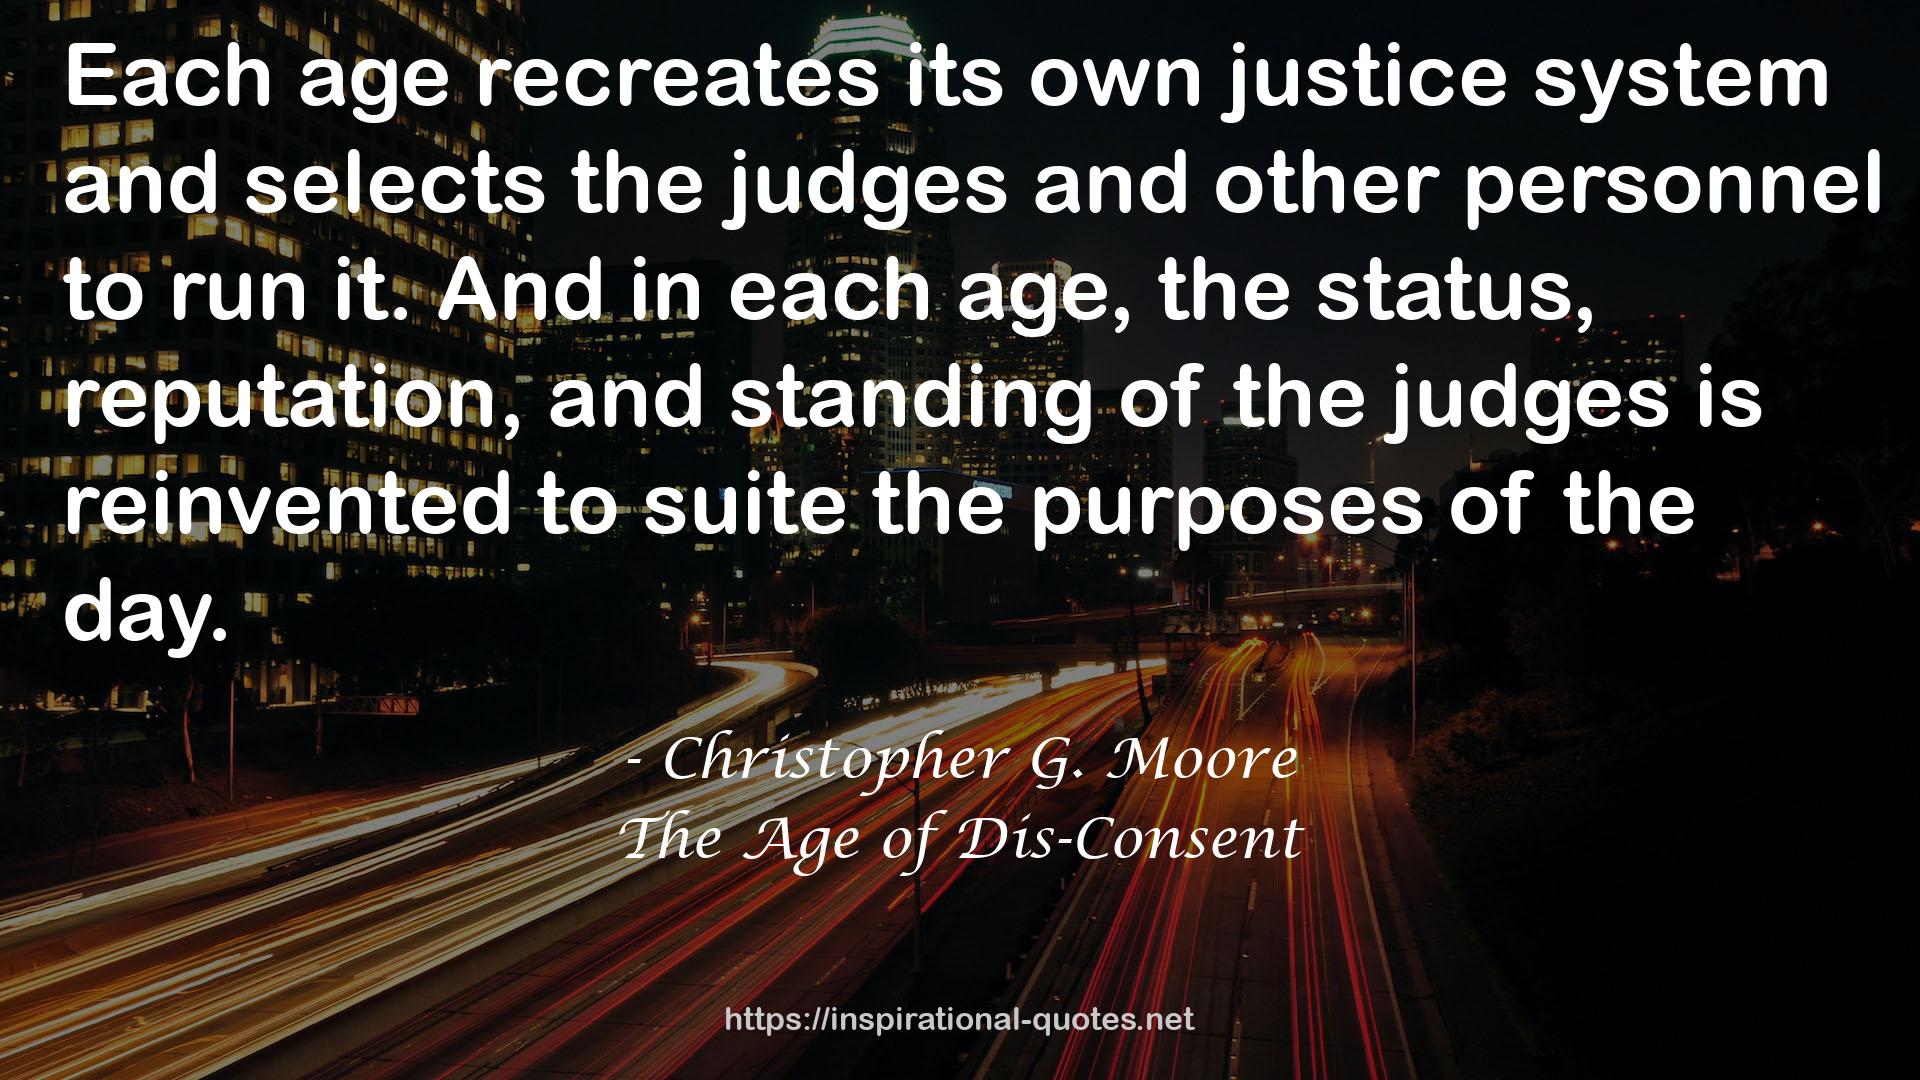 Christopher G. Moore QUOTES